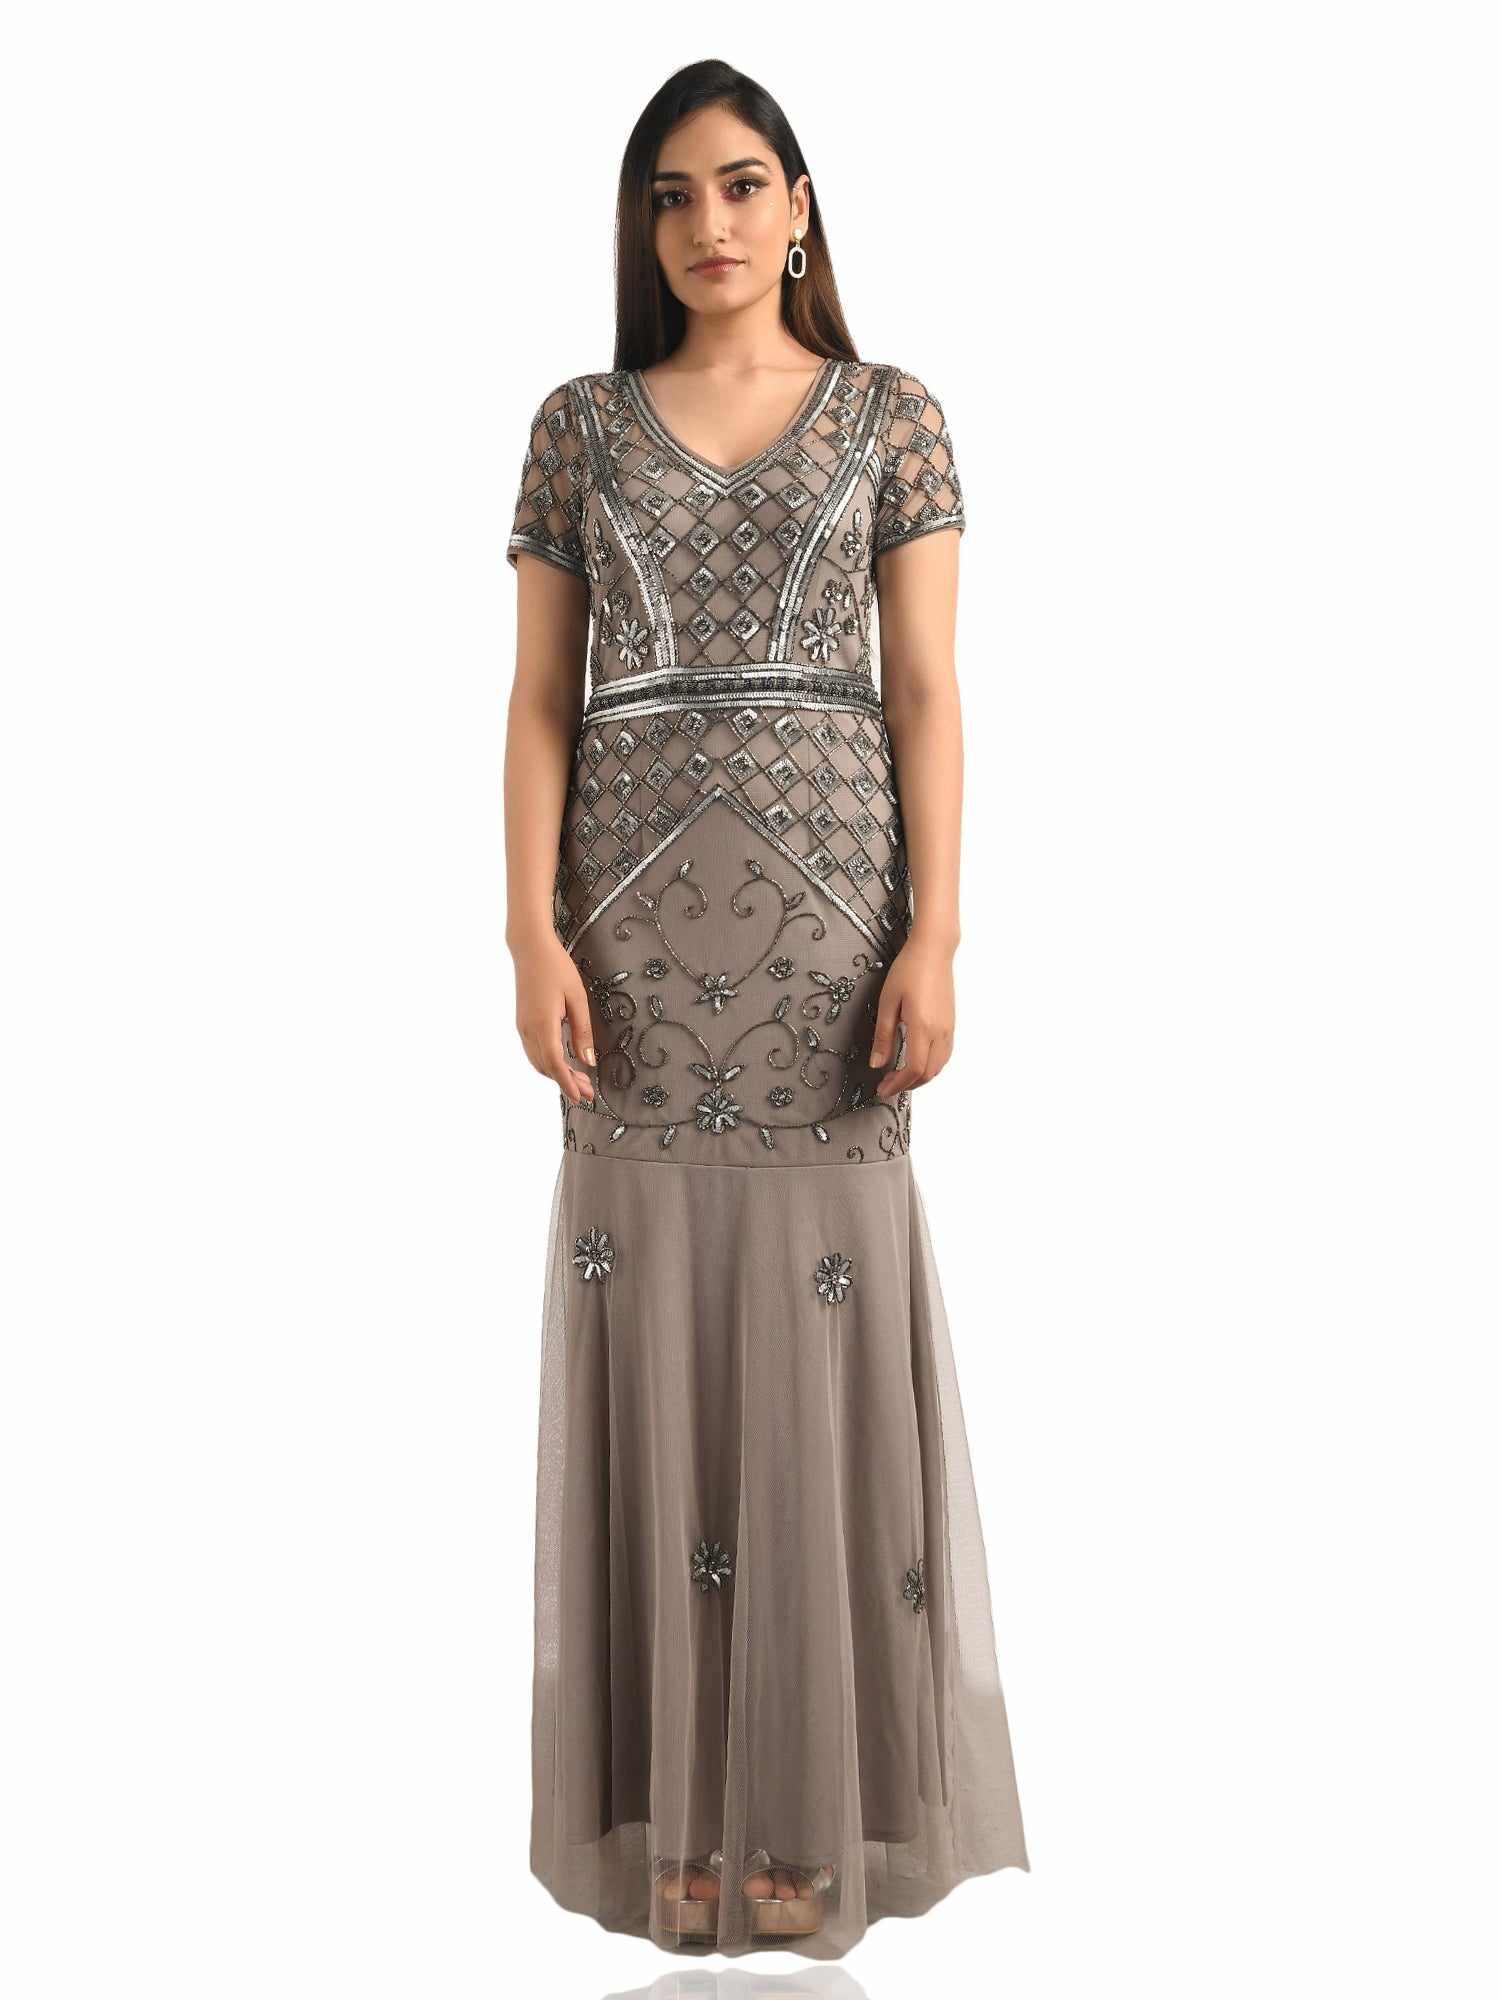 embellished gown with diamond motif